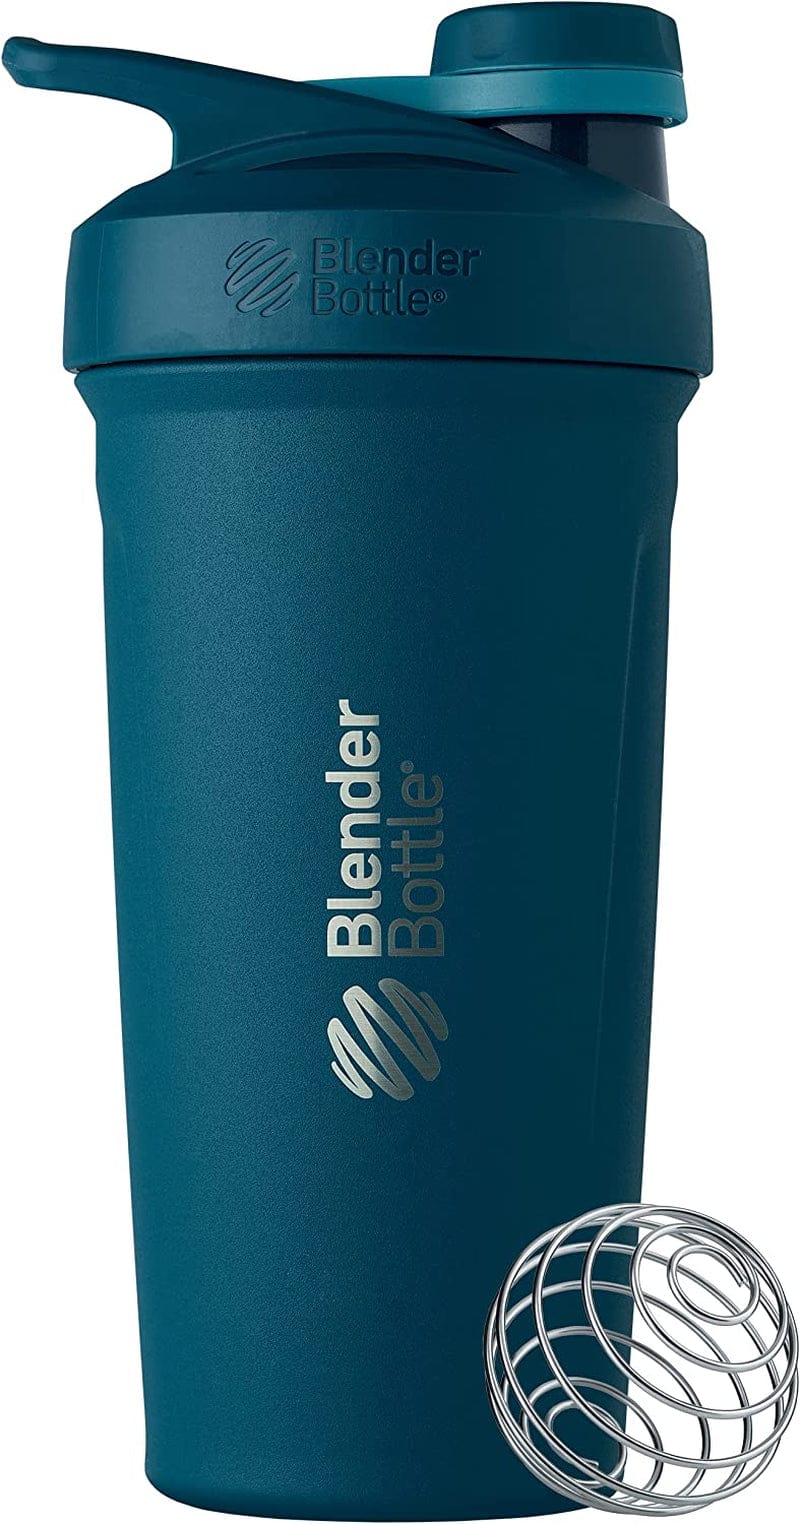 Blenderbottle Strada Shaker Cup Insulated Stainless Steel Water Bottle with Wire Whisk, 24-Ounce, Black Home & Garden > Kitchen & Dining > Barware BlenderBottle Blue Strada Twist 